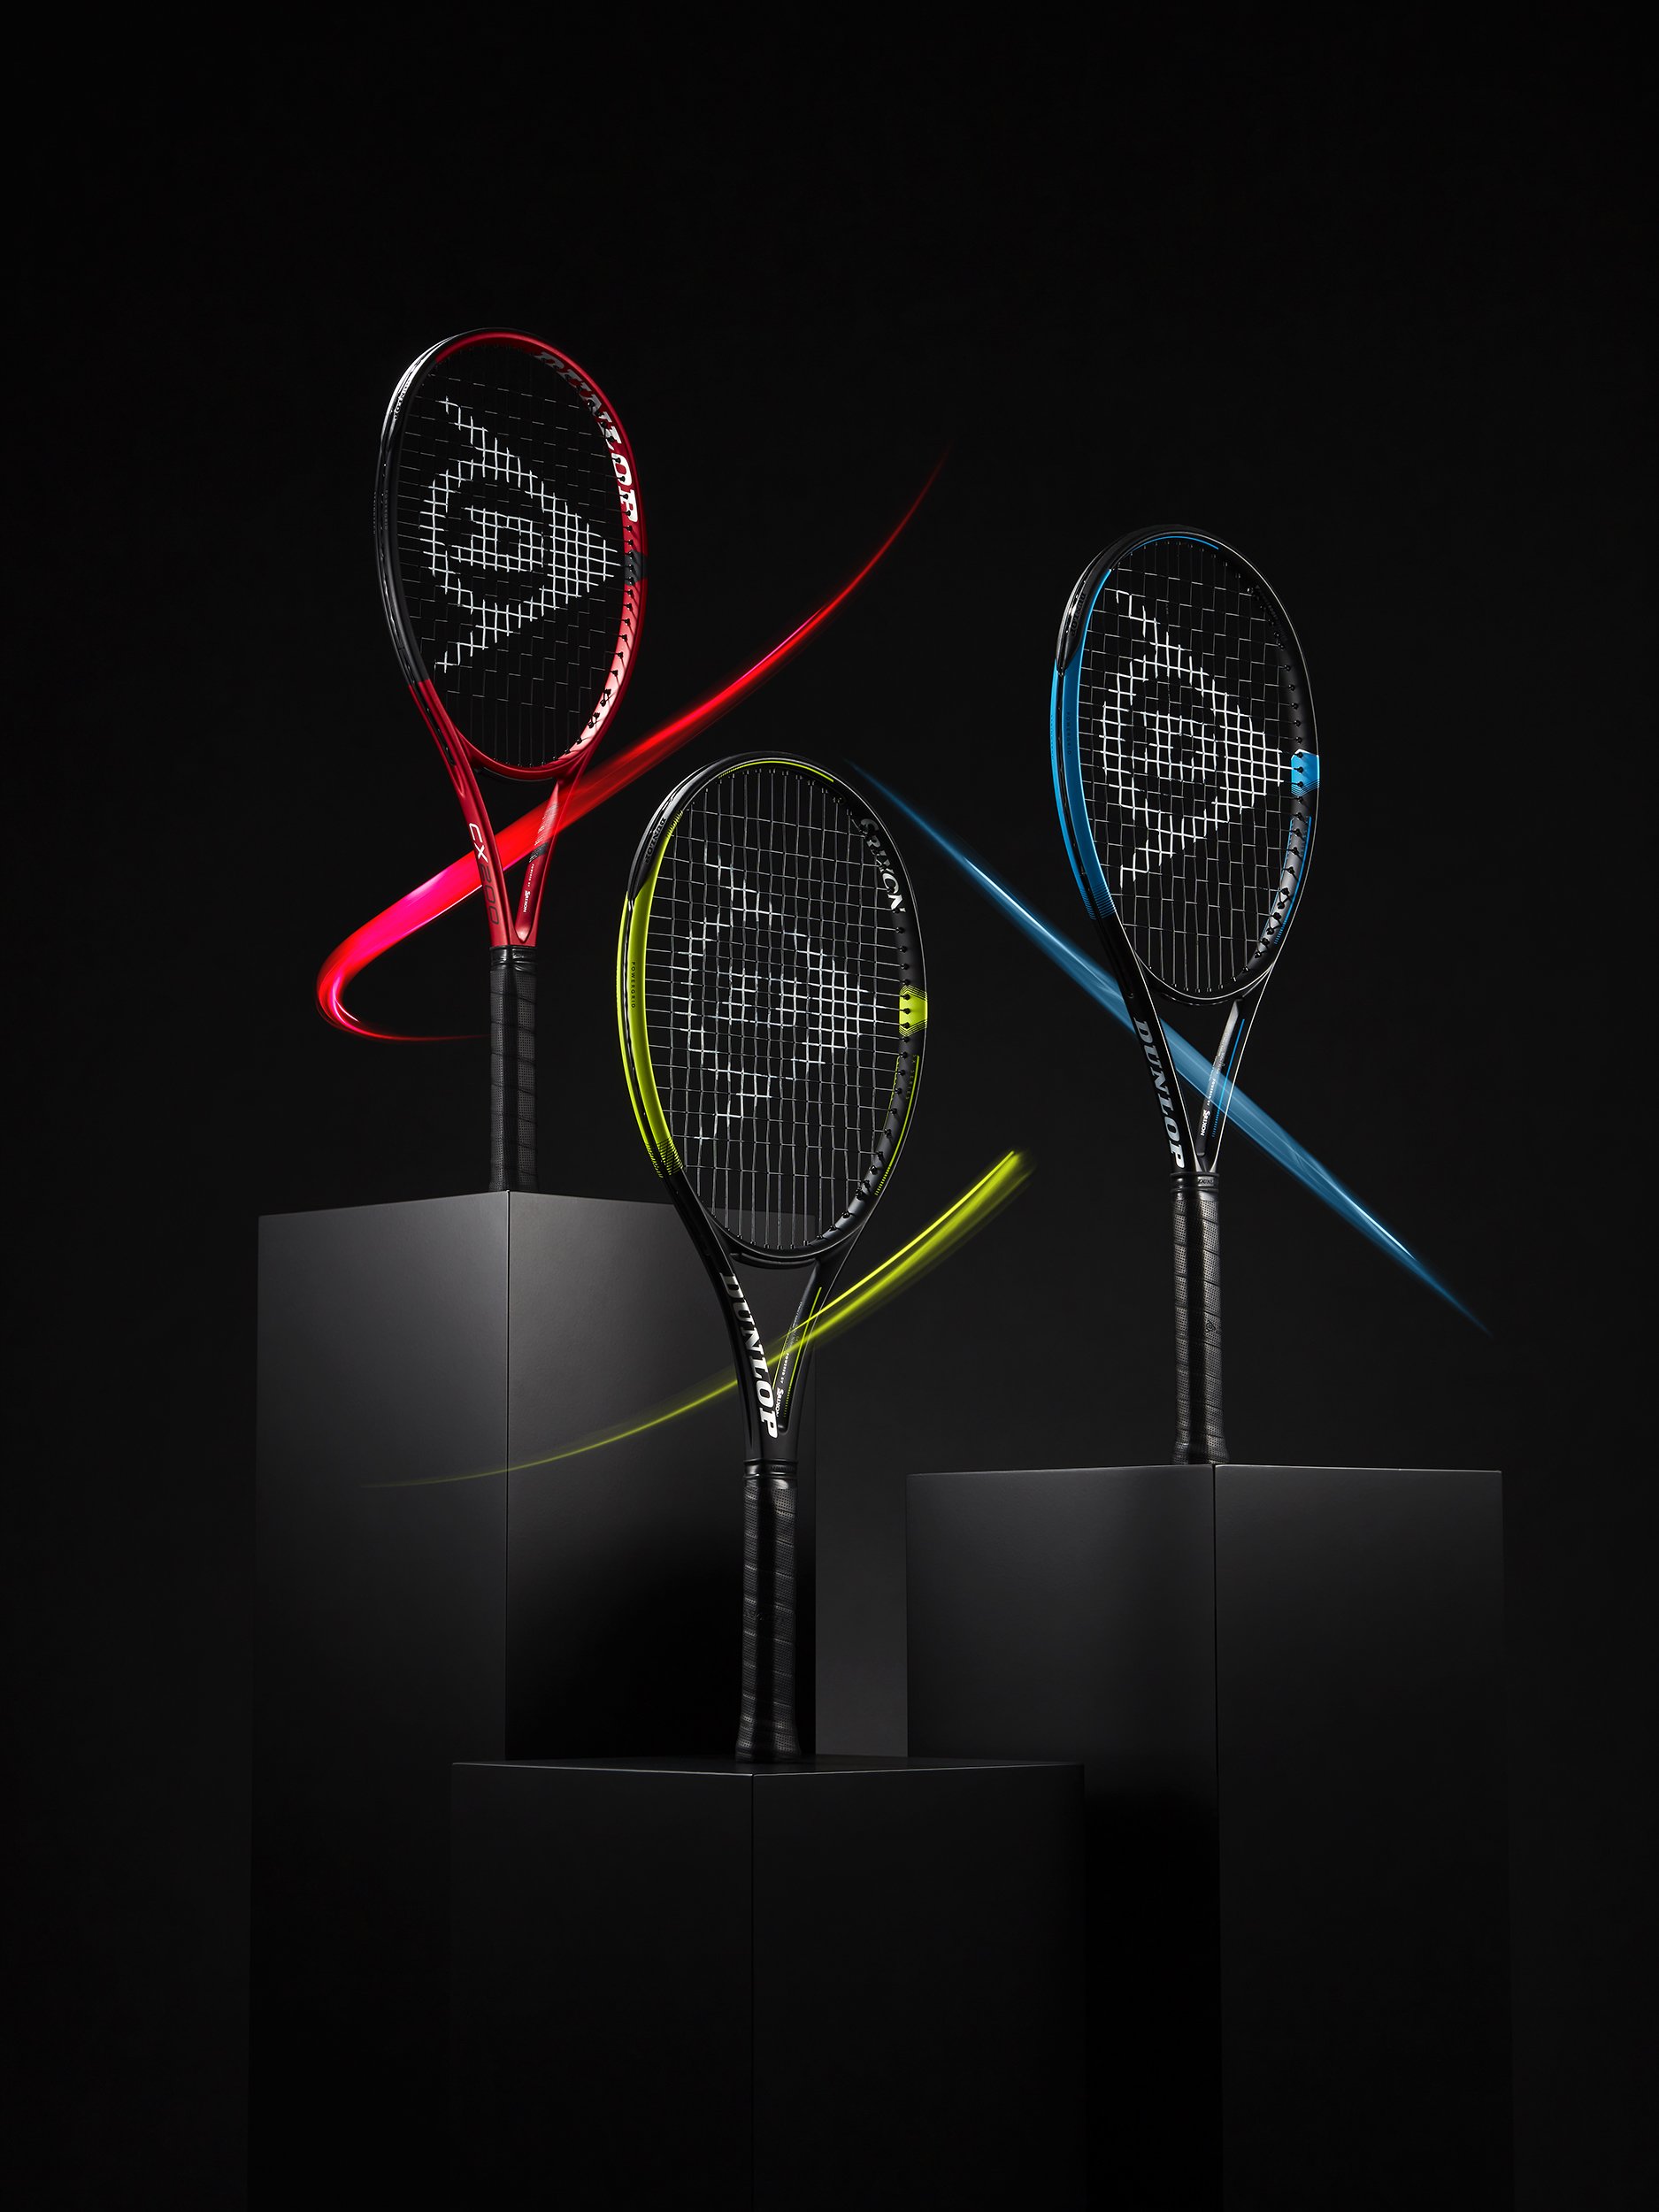 Dunlop Tennis Racket Group - Advertising Photography by Simon Lyle Photography